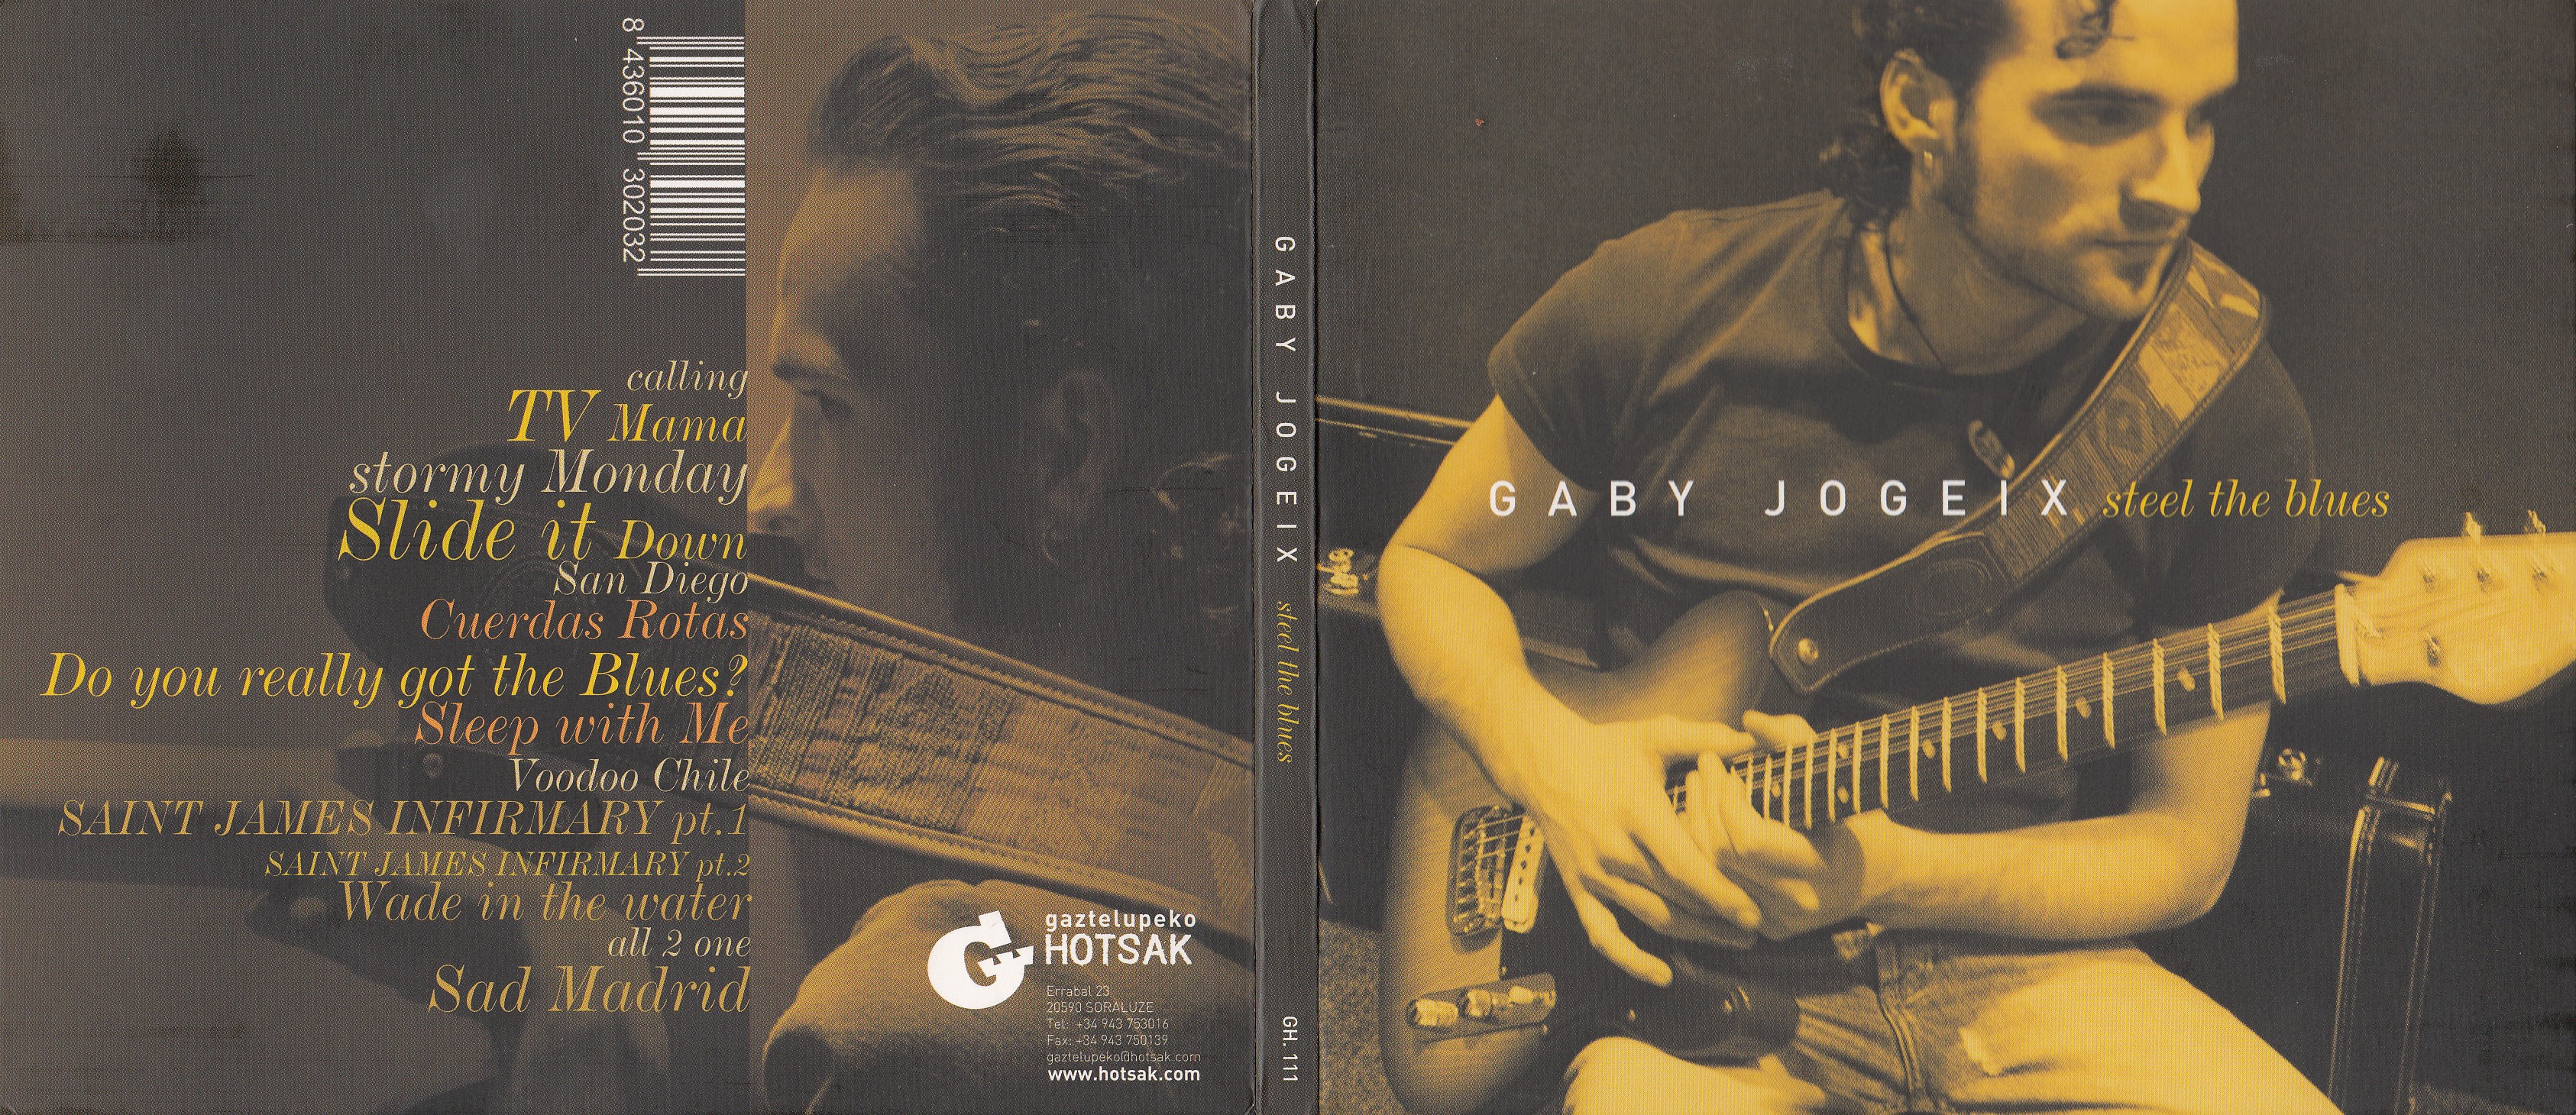 Gaby Jogeix - 2007 - Steel The Blues